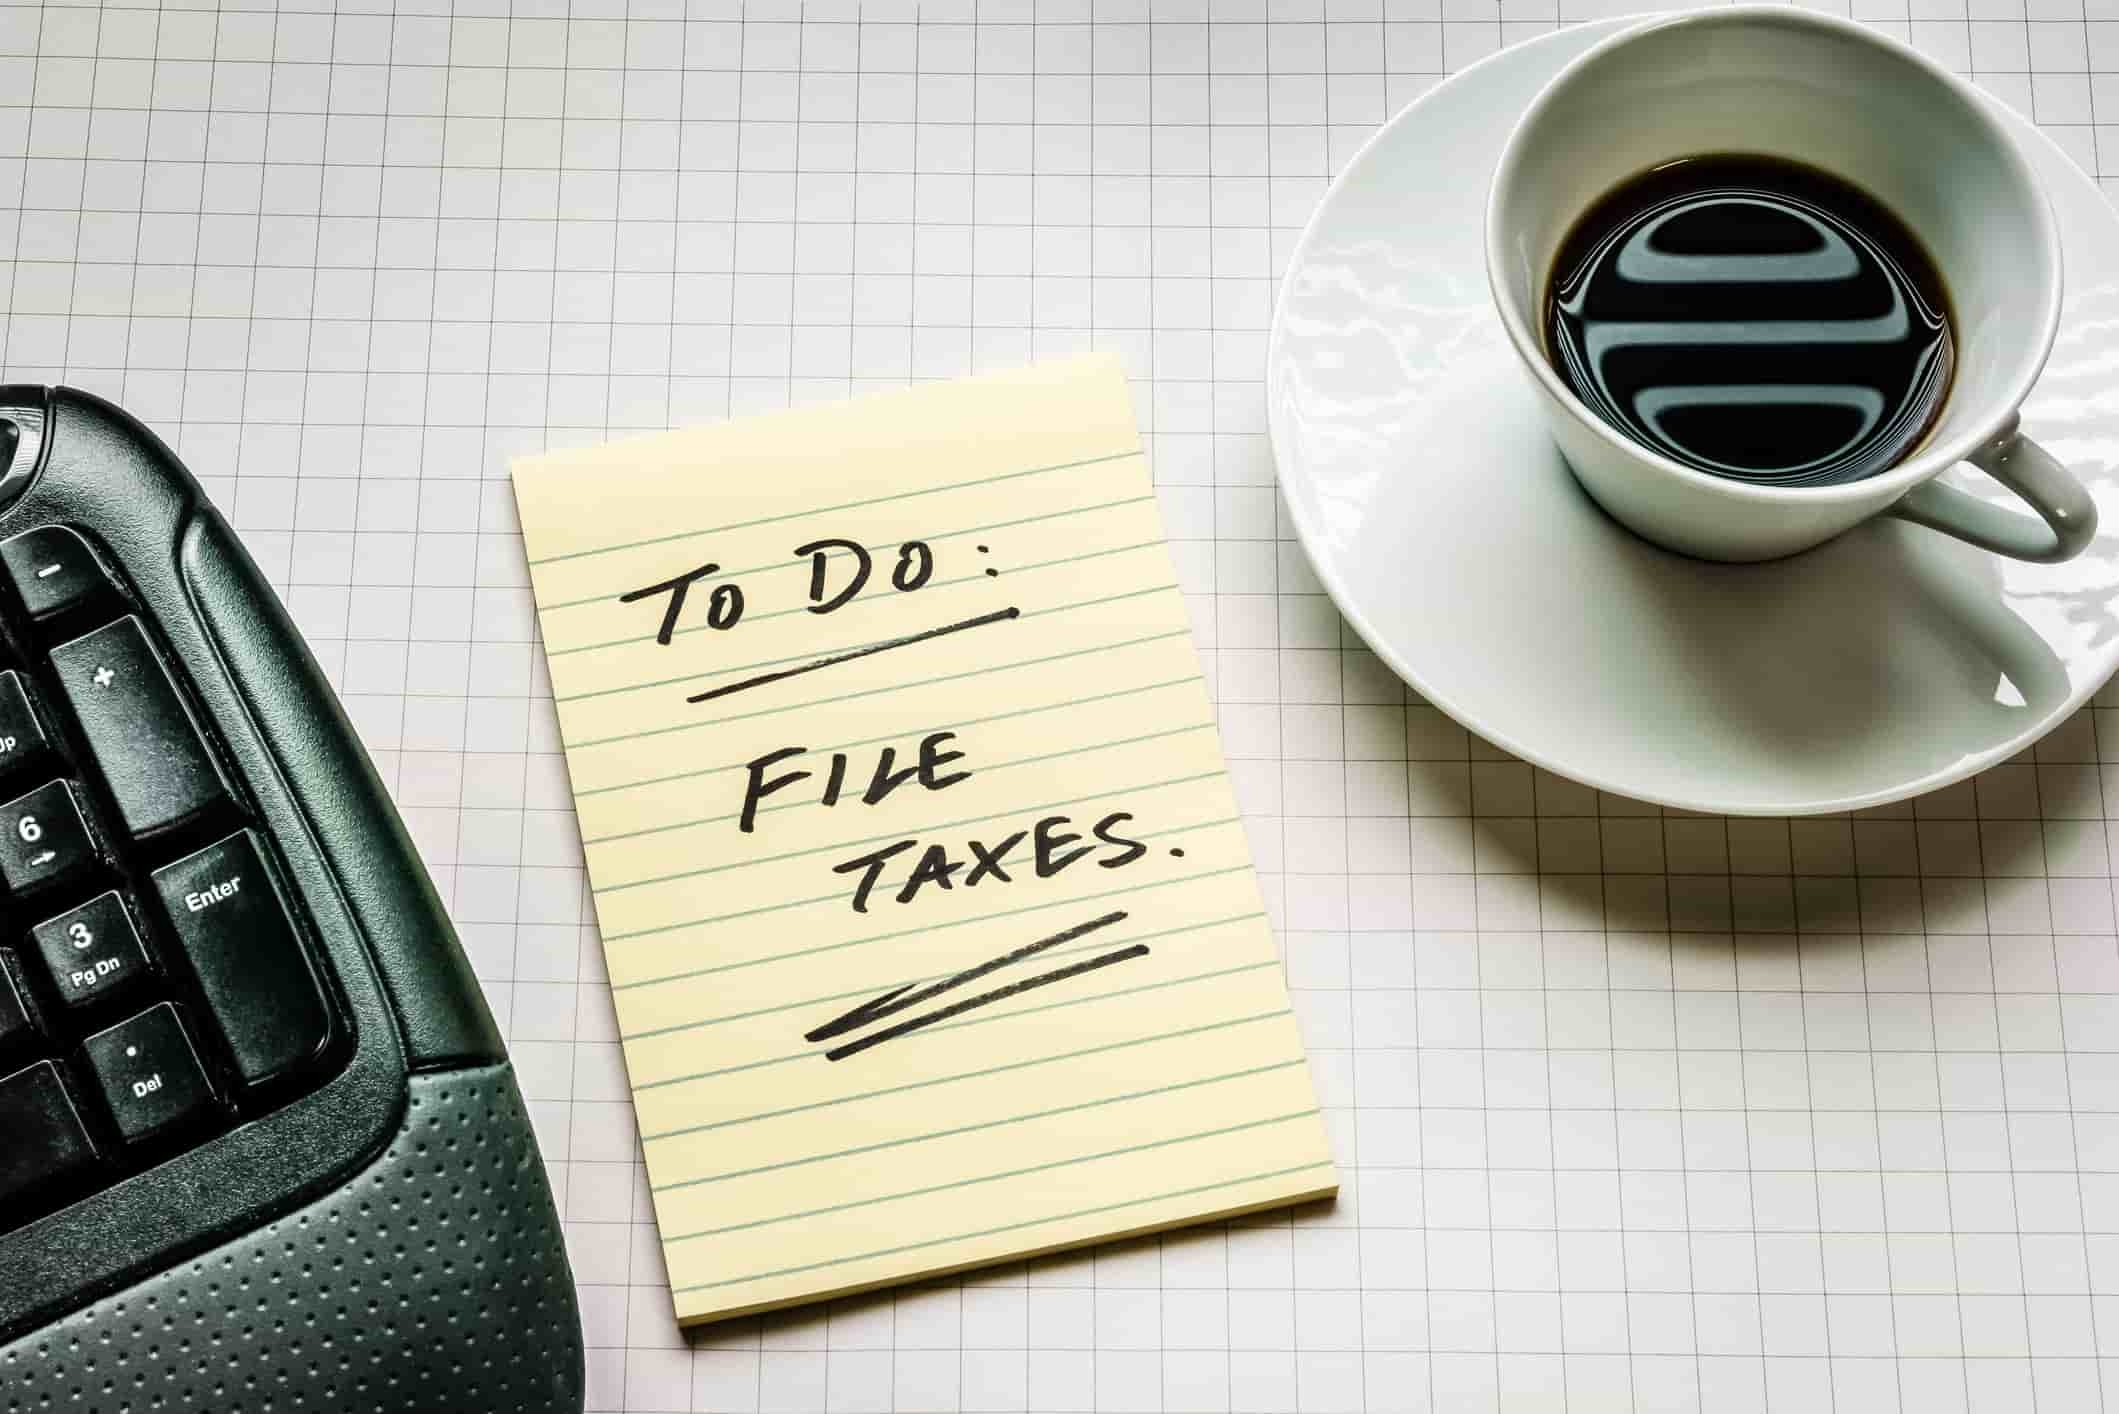 File your taxes the easy way with Taxback